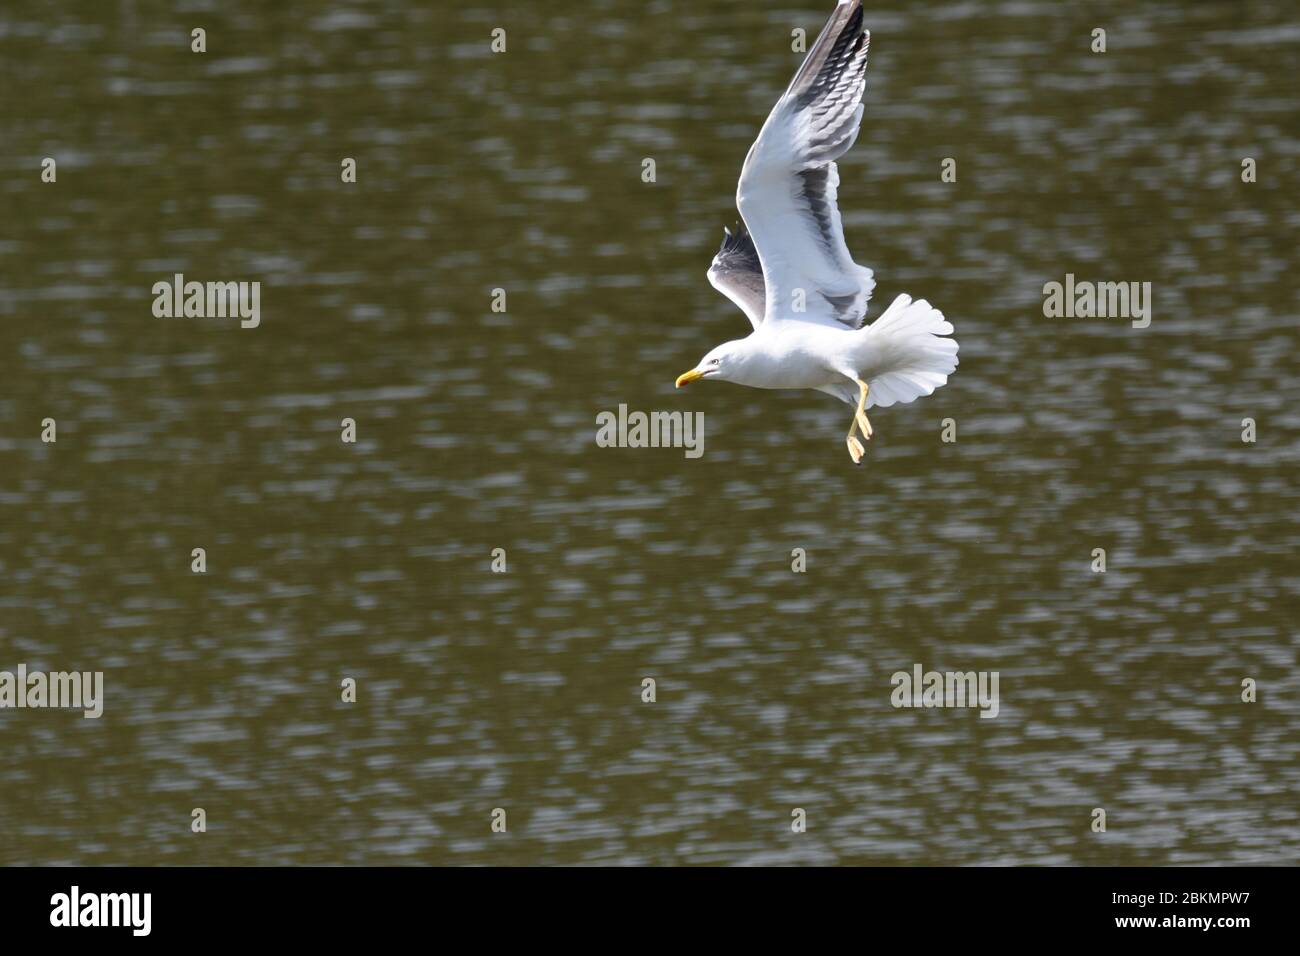 A bird flying with water as the background Stock Photo